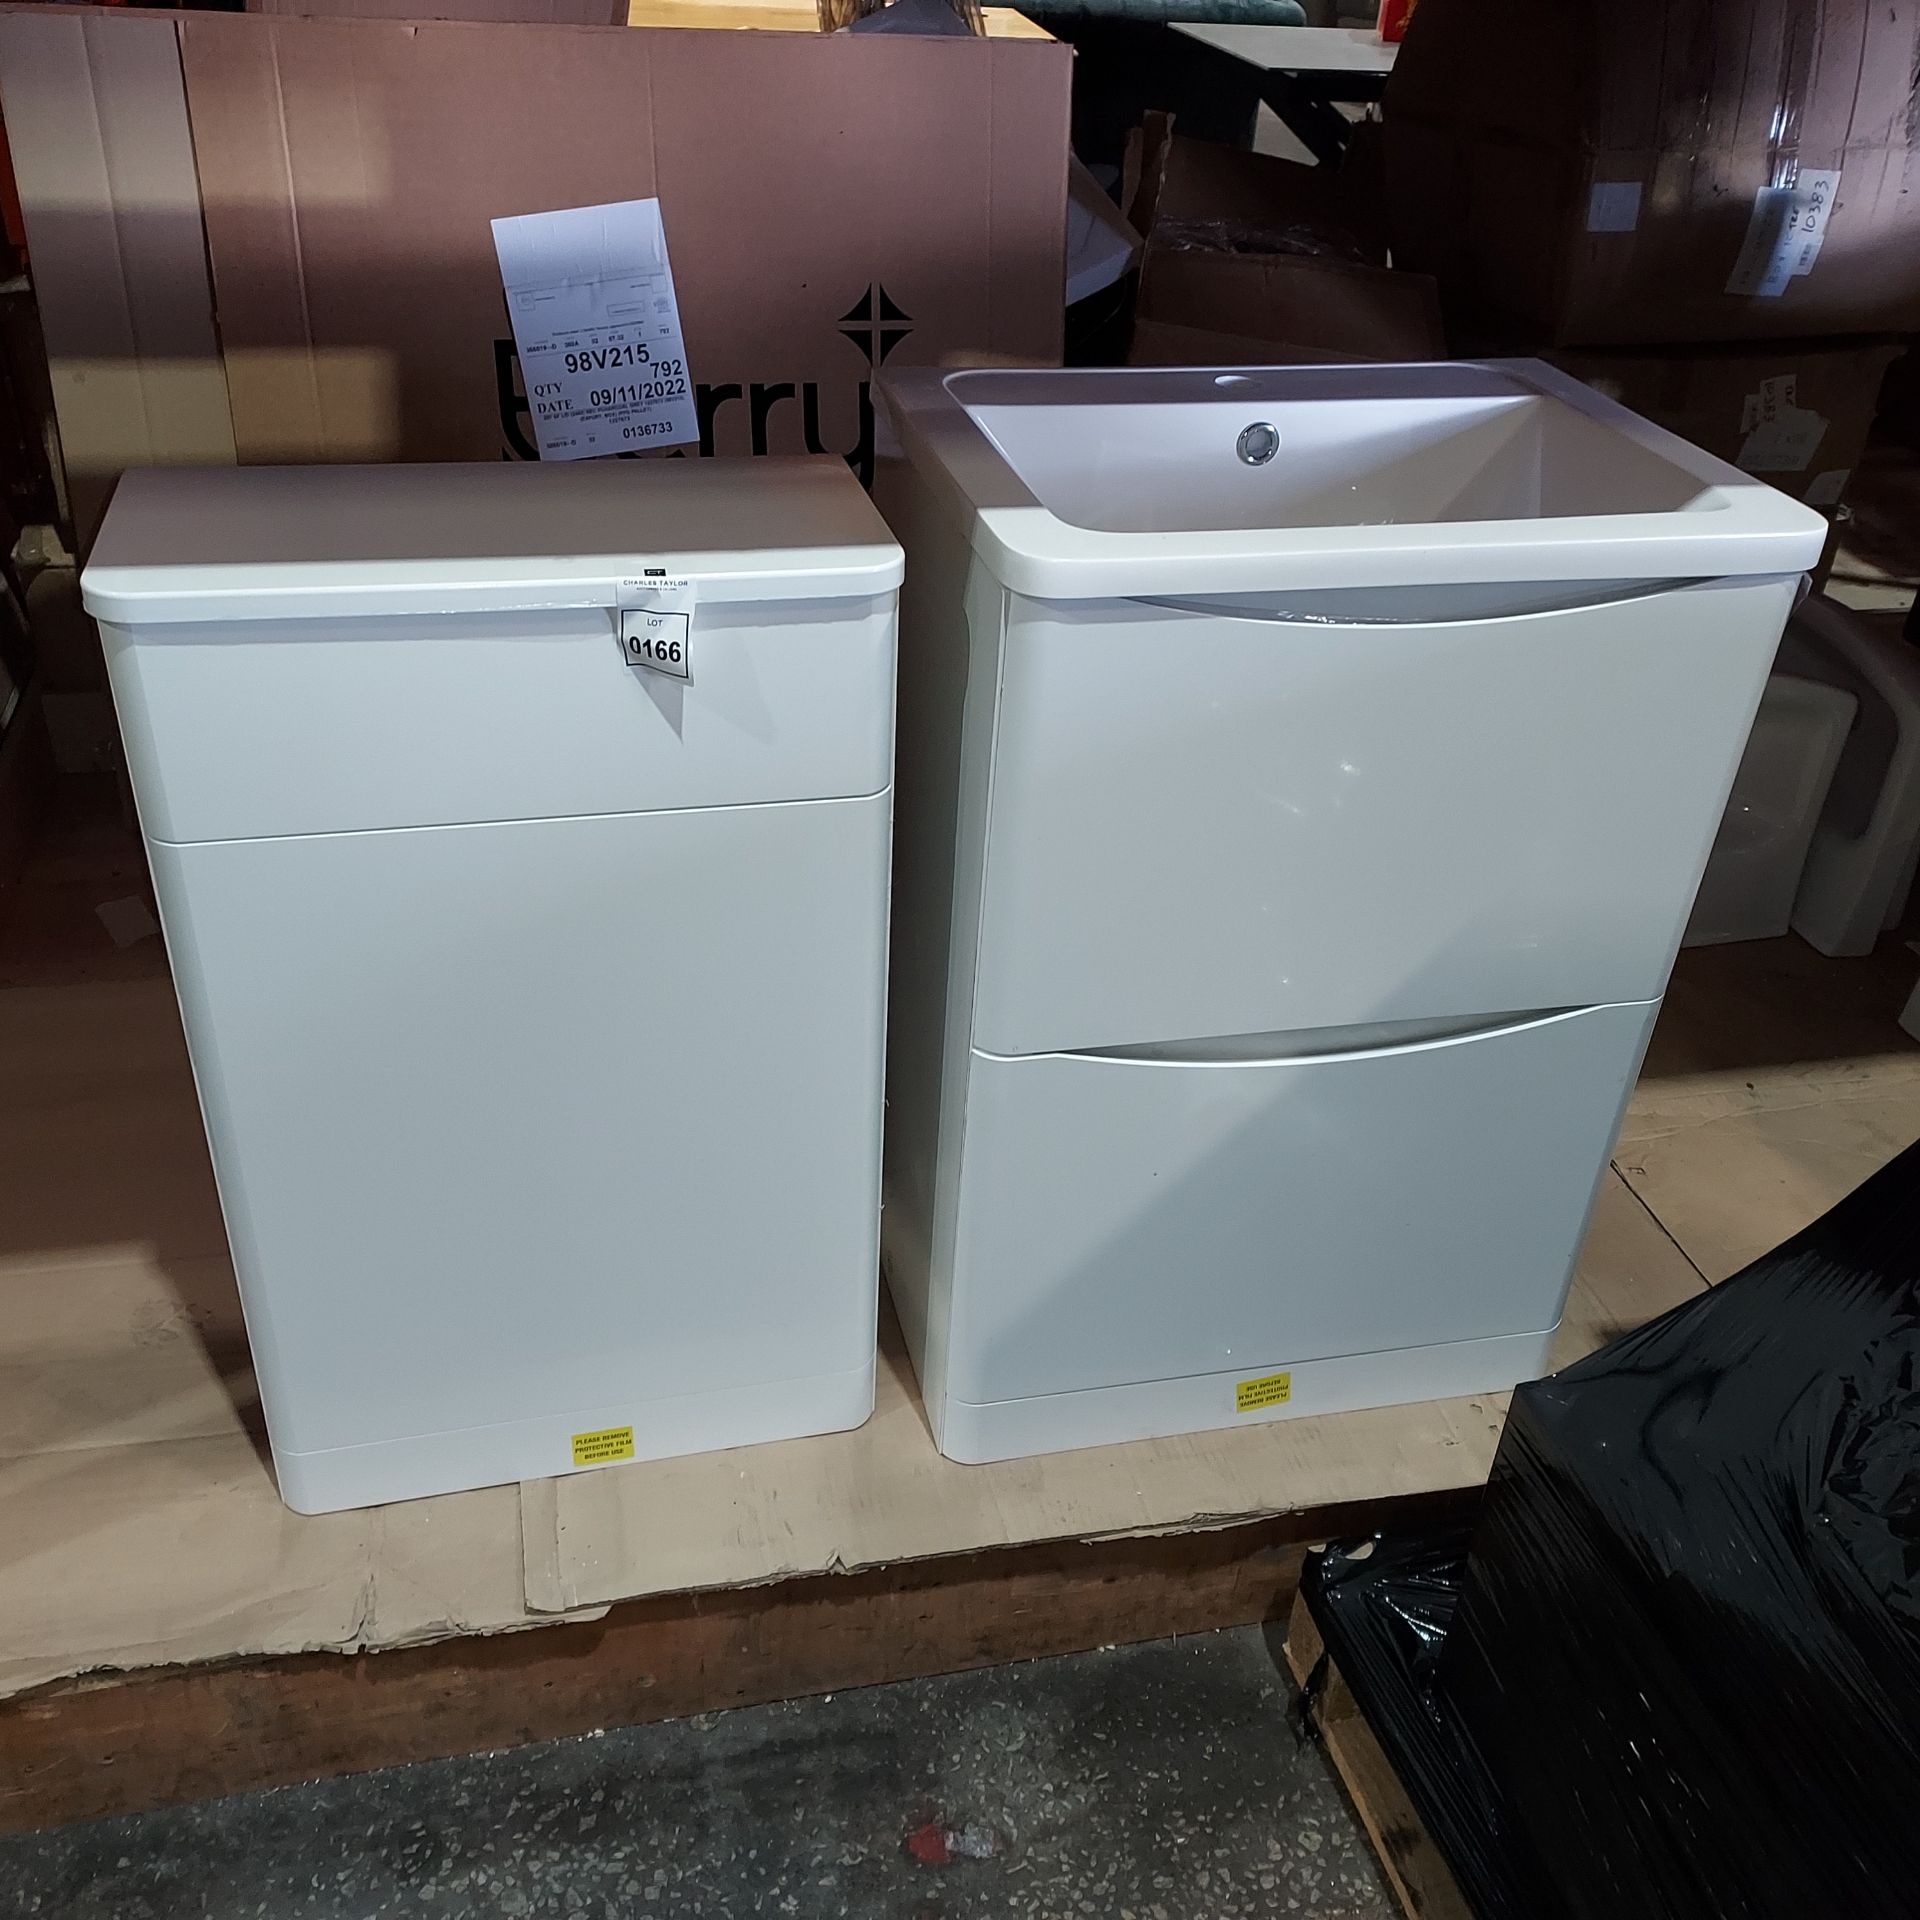 3 PIECE BRAND NEW BATHROOM LOT CONTAINING 1 X ELATION CAVALIER WC UNIT IN WHITE ( W 51 CM X D 25